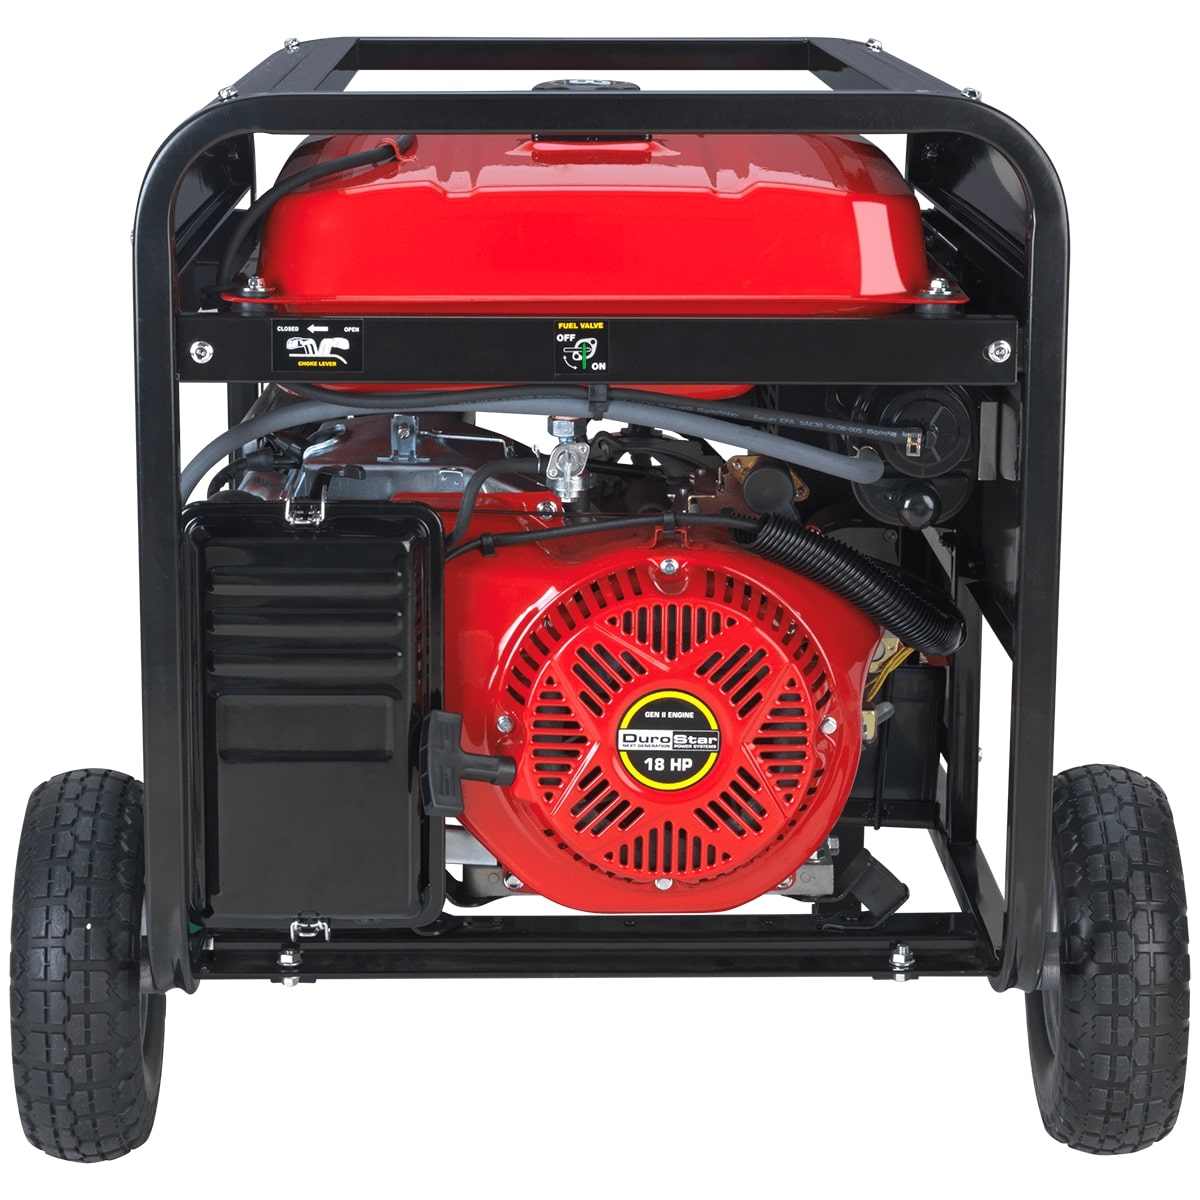 DuroStar DS10000EH 10,000W 439cc Dual Fuel Portable Generator - Front view